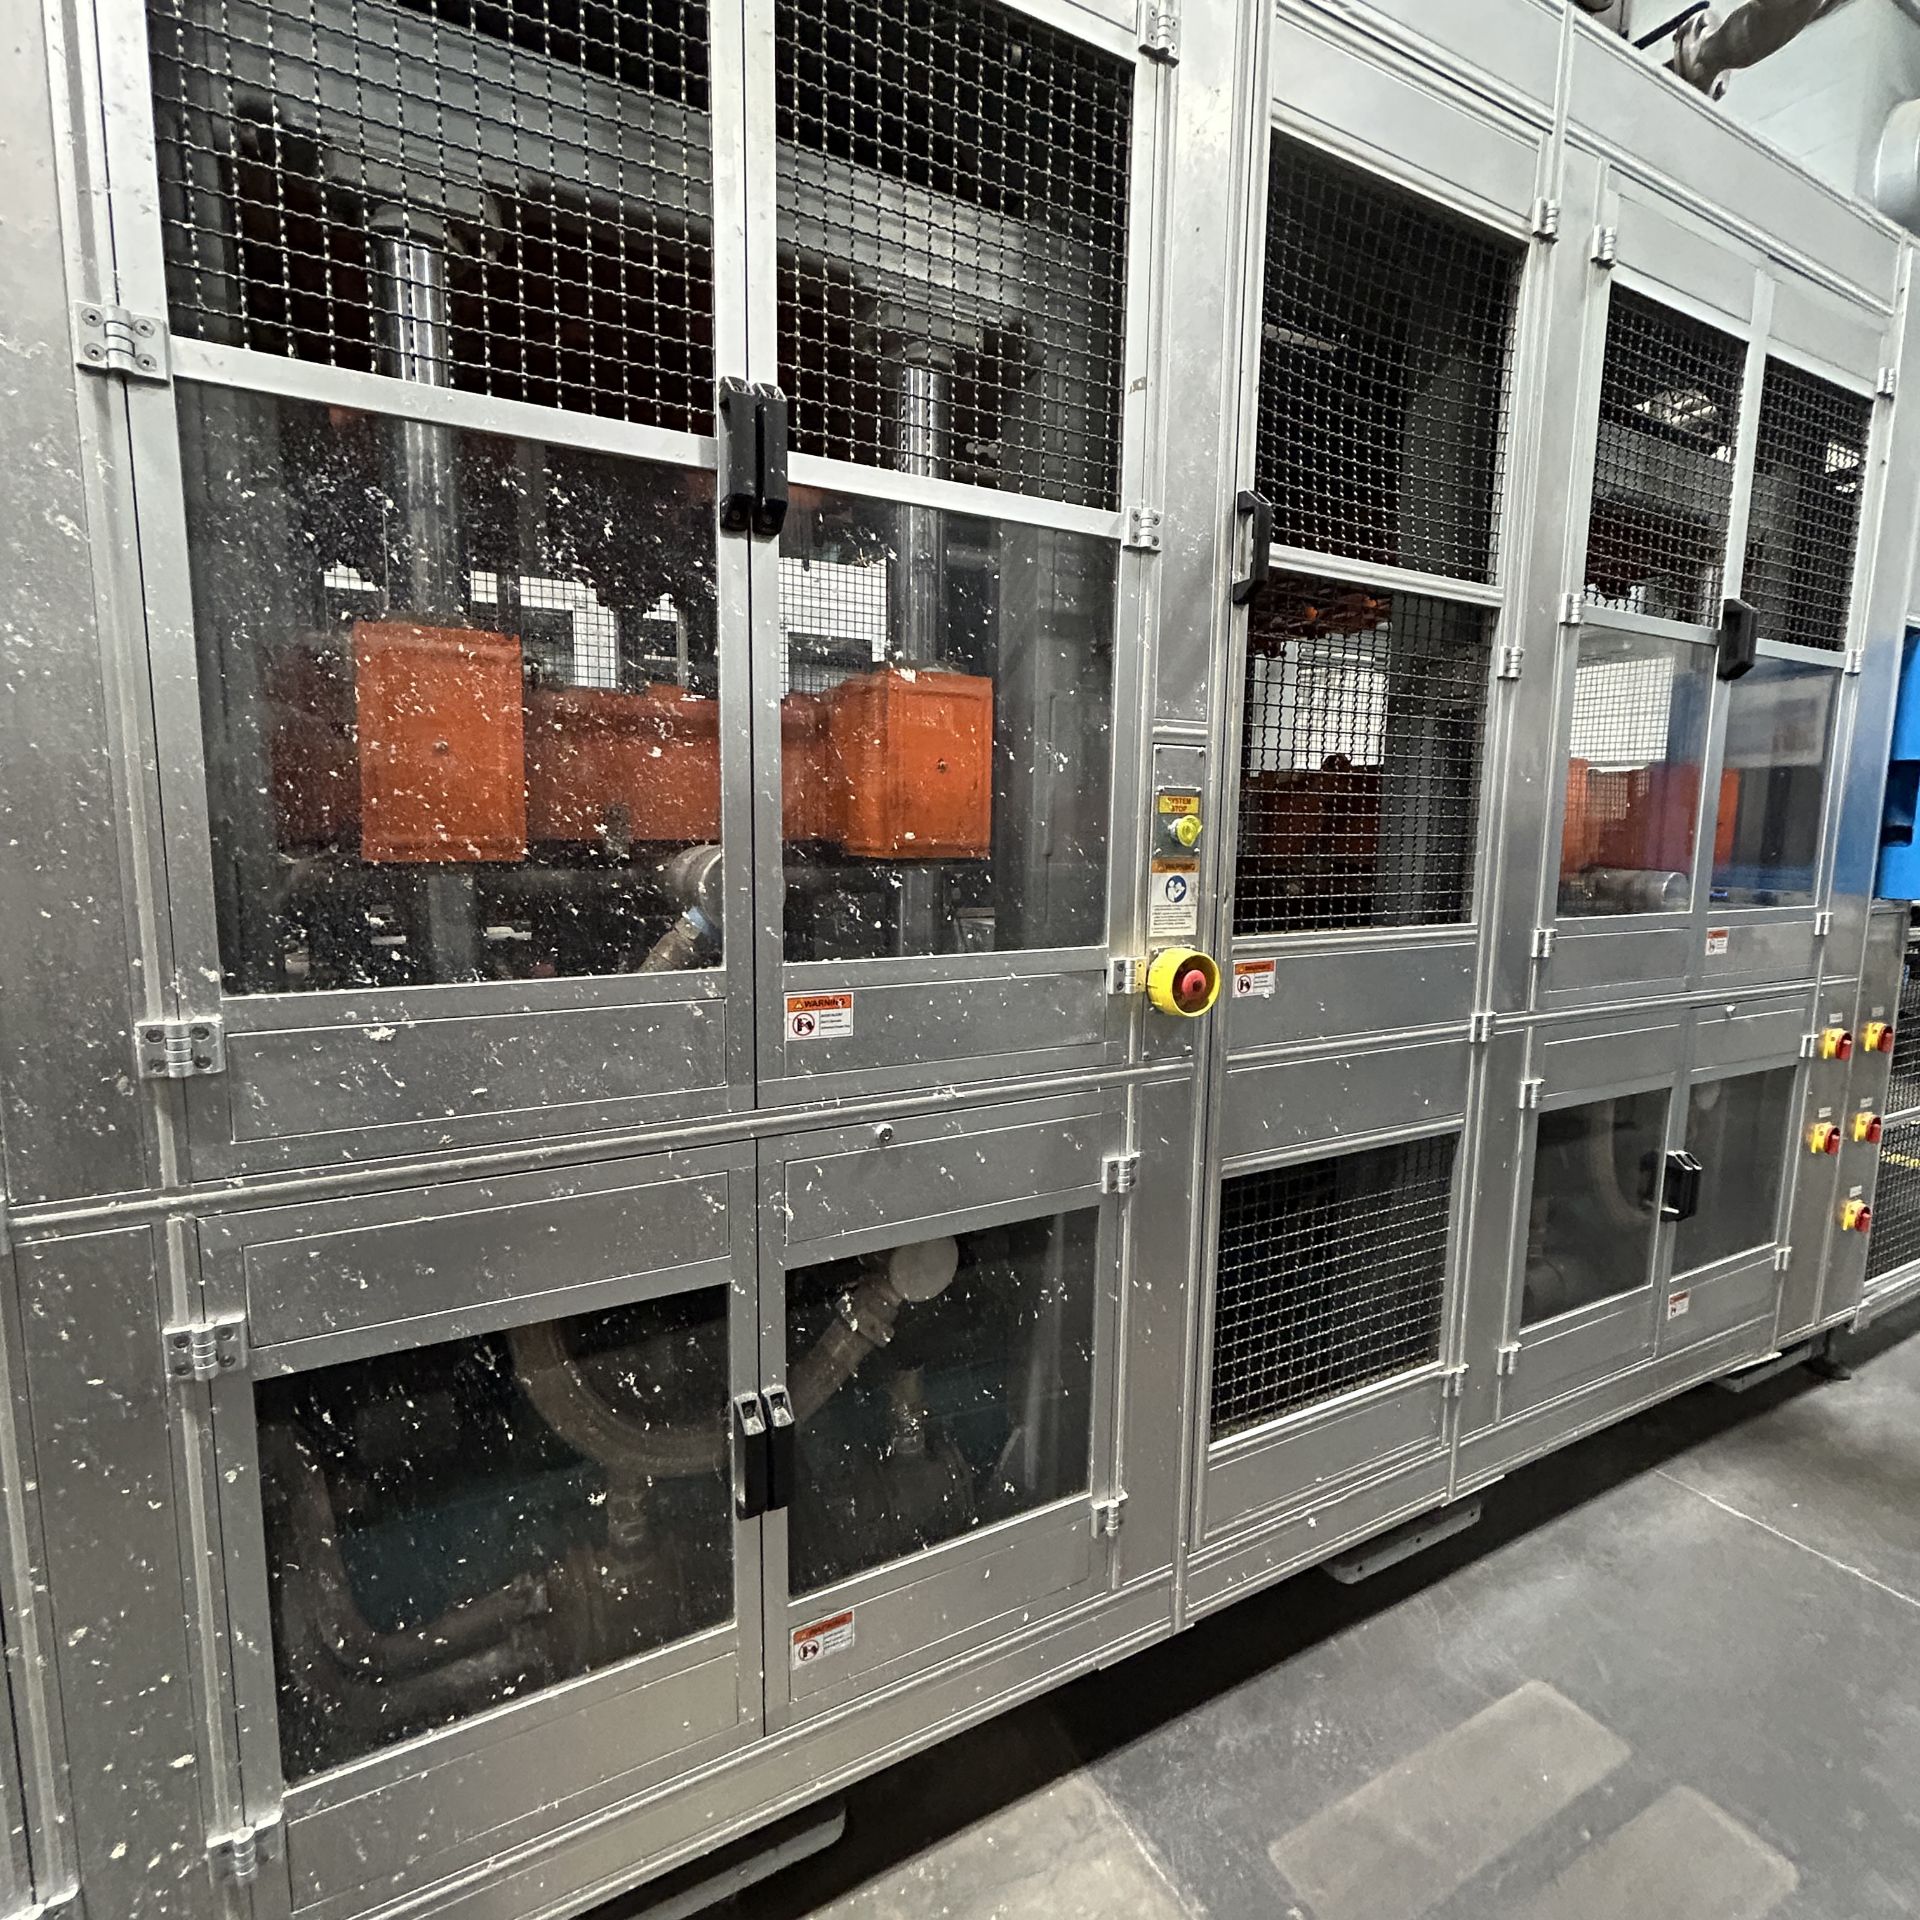 TPM-1500 3-Stage Pulp Thermoforming Machine Equipped With (1) 2018 TPM-AS-1500 2-Stage Auto Stacker - Image 6 of 35